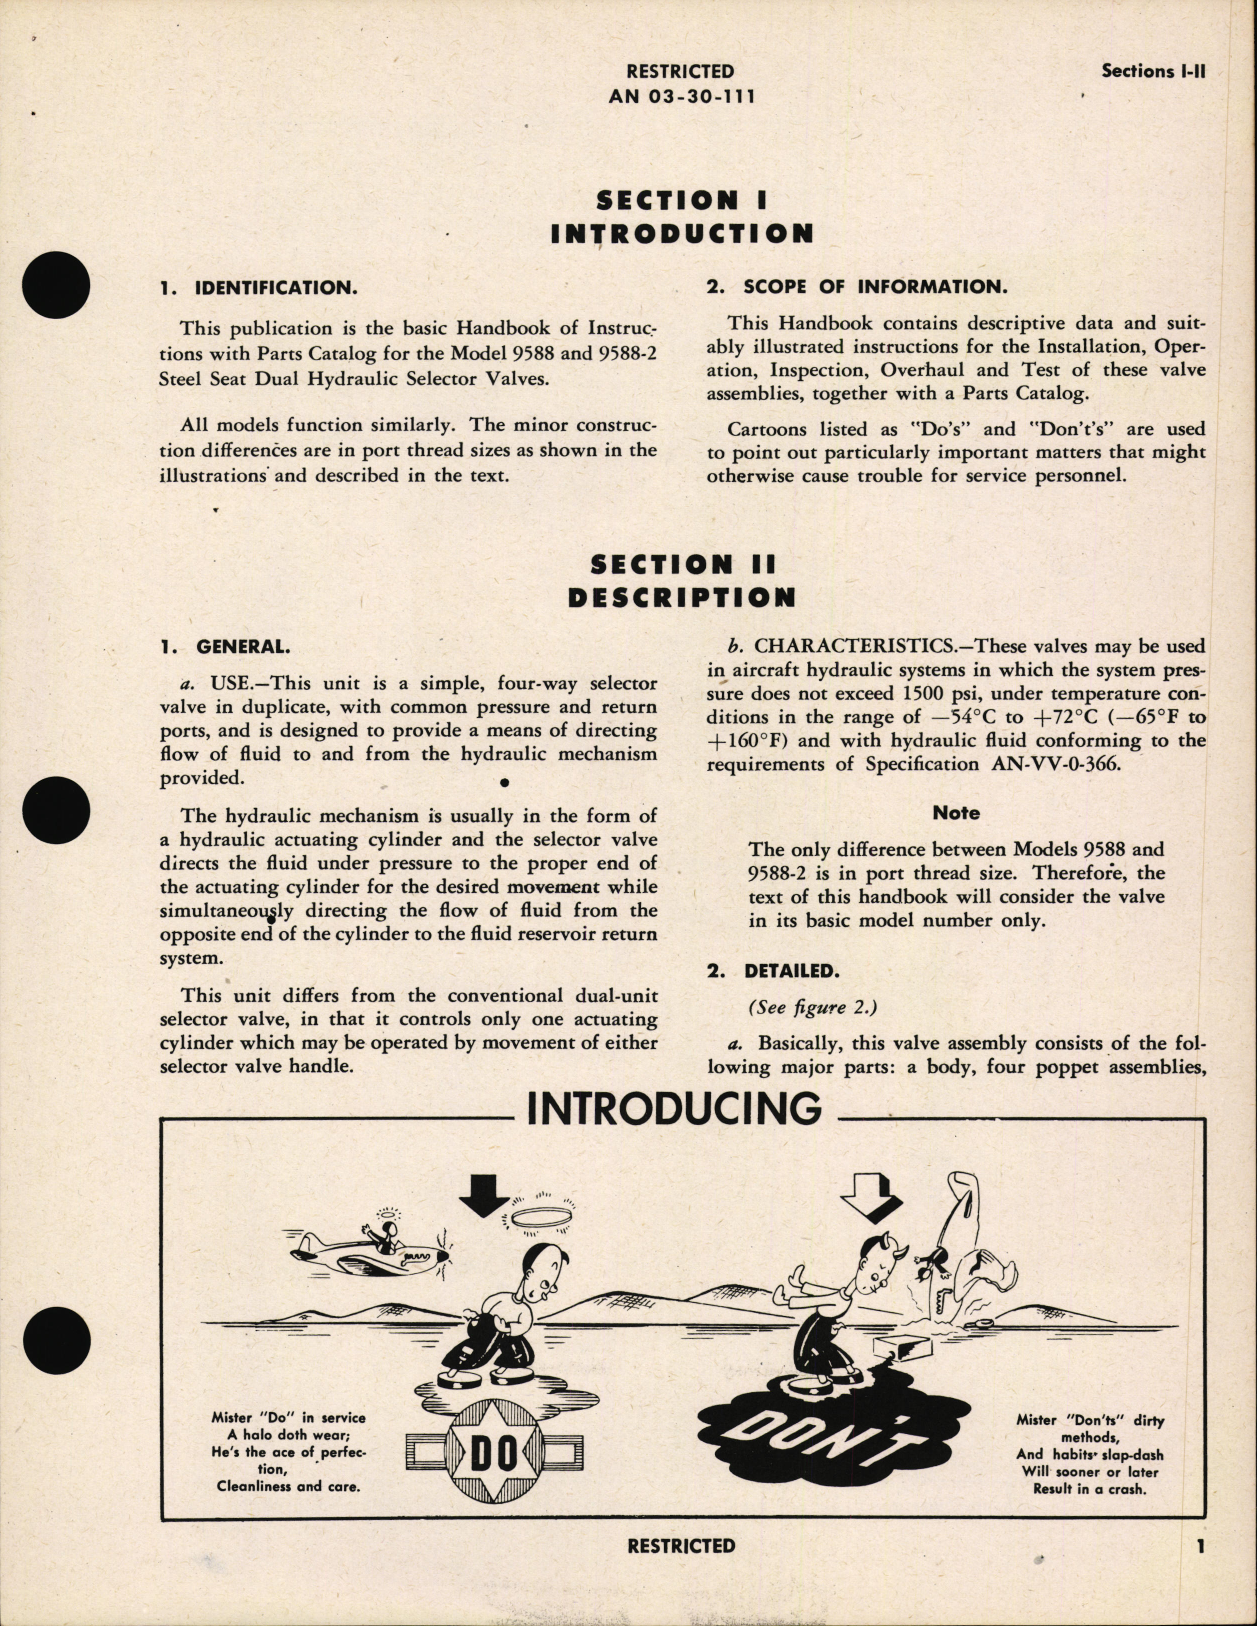 Sample page 5 from AirCorps Library document: Handbook of Instructions with Parts Catalog for Steel Seat Hydraulic Selector Valves